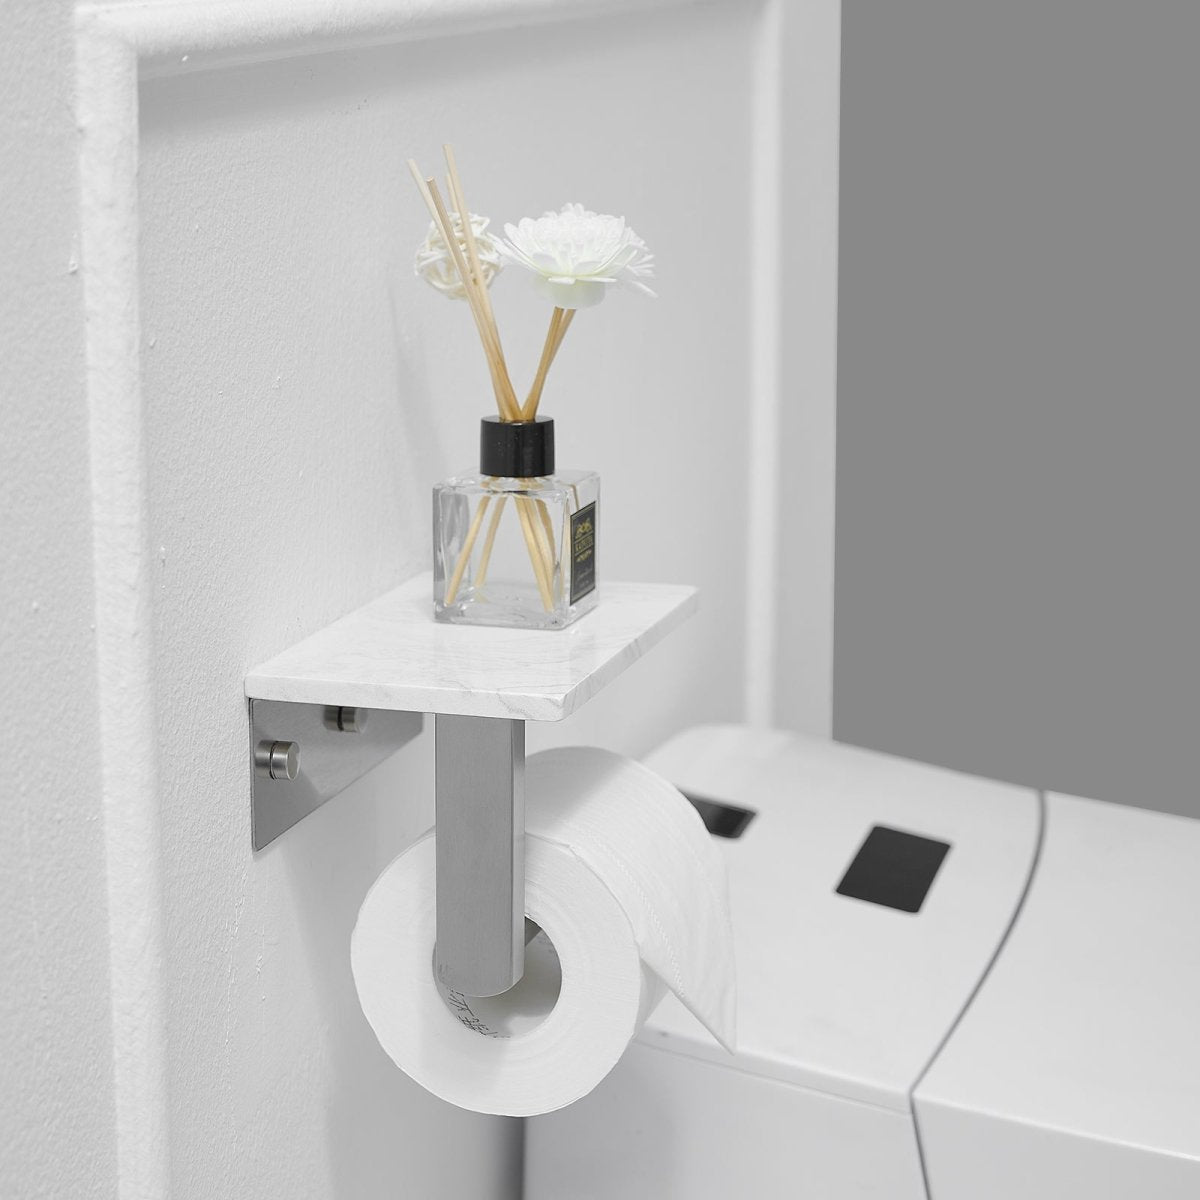 Wall Mount Toilet Paper Holder with Natural Marble Shelf Nickel - buyfaucet.com